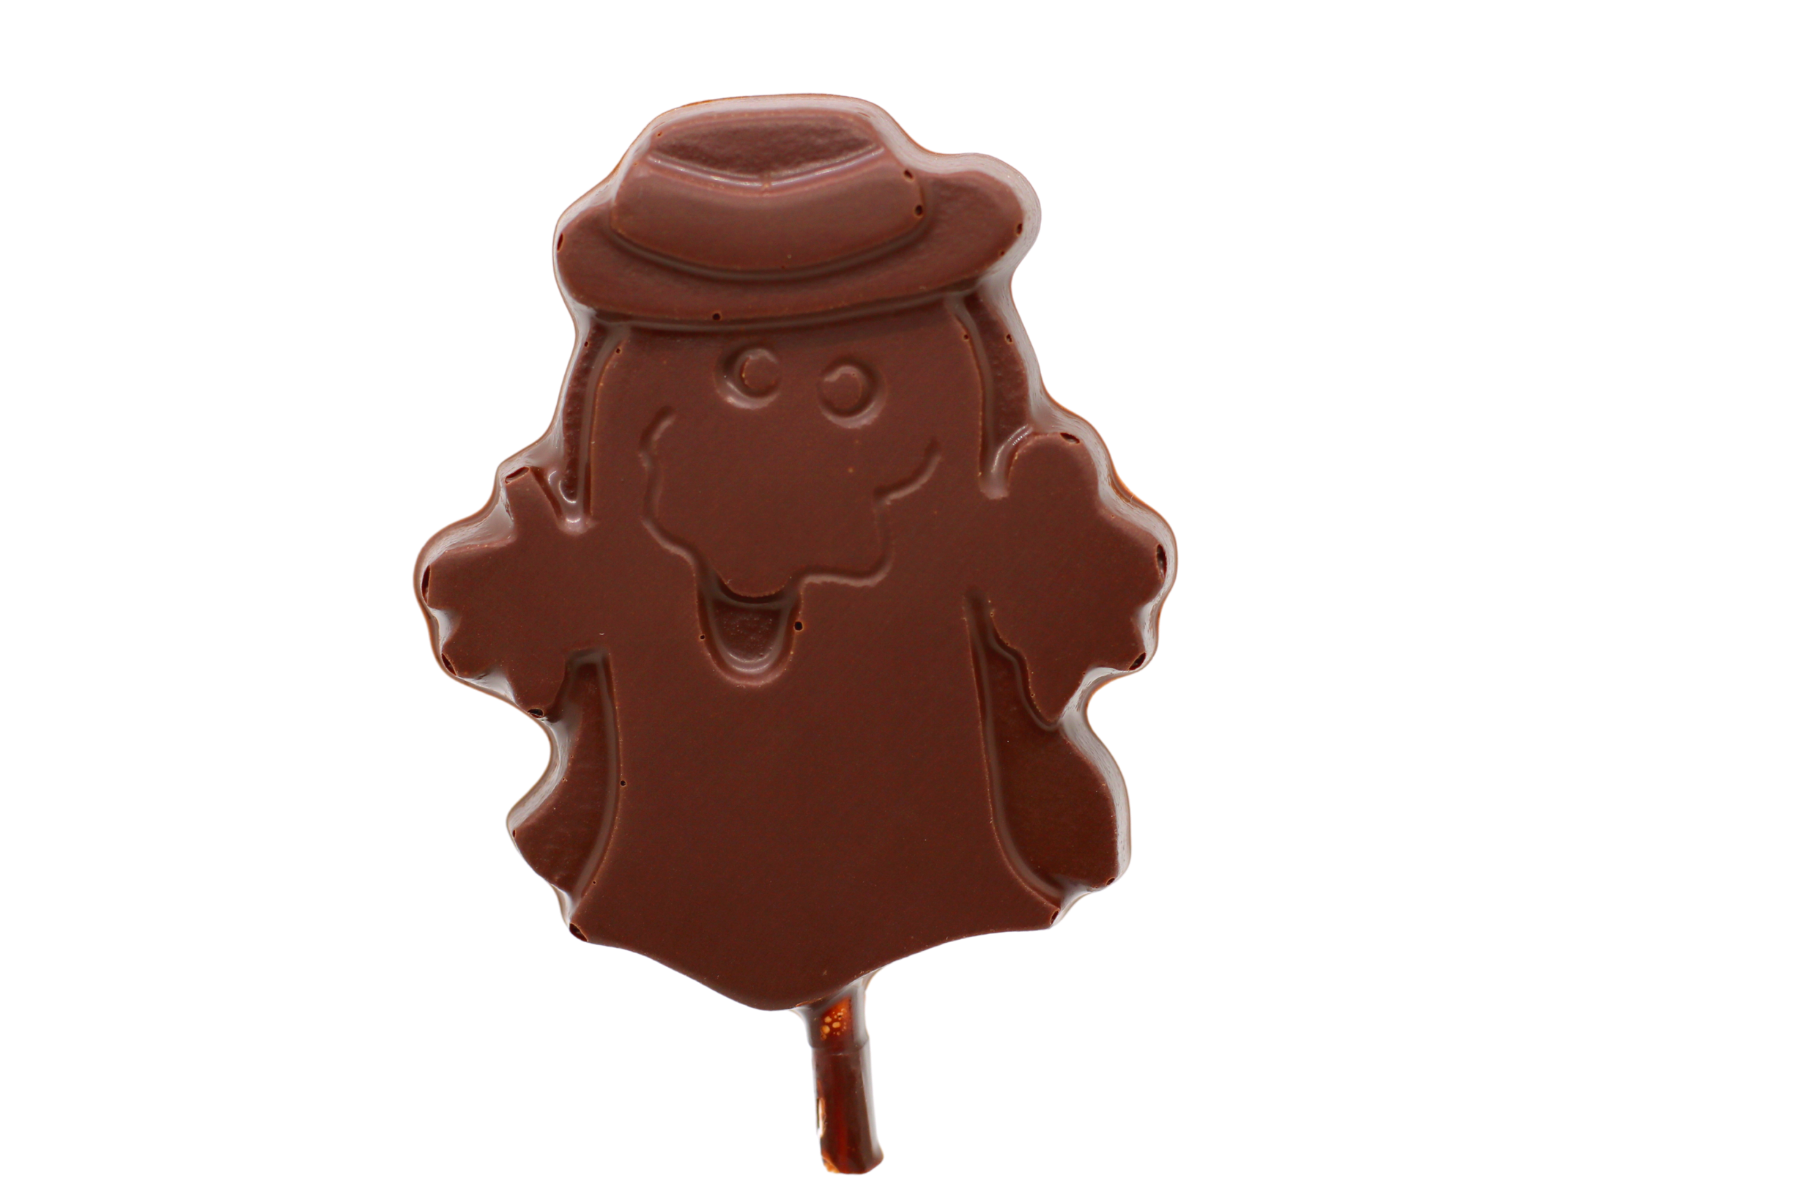 Spooky delight! Halloween Chocolate Pop with a ghost wearing a cap – a whimsical treat for the season's festivities.